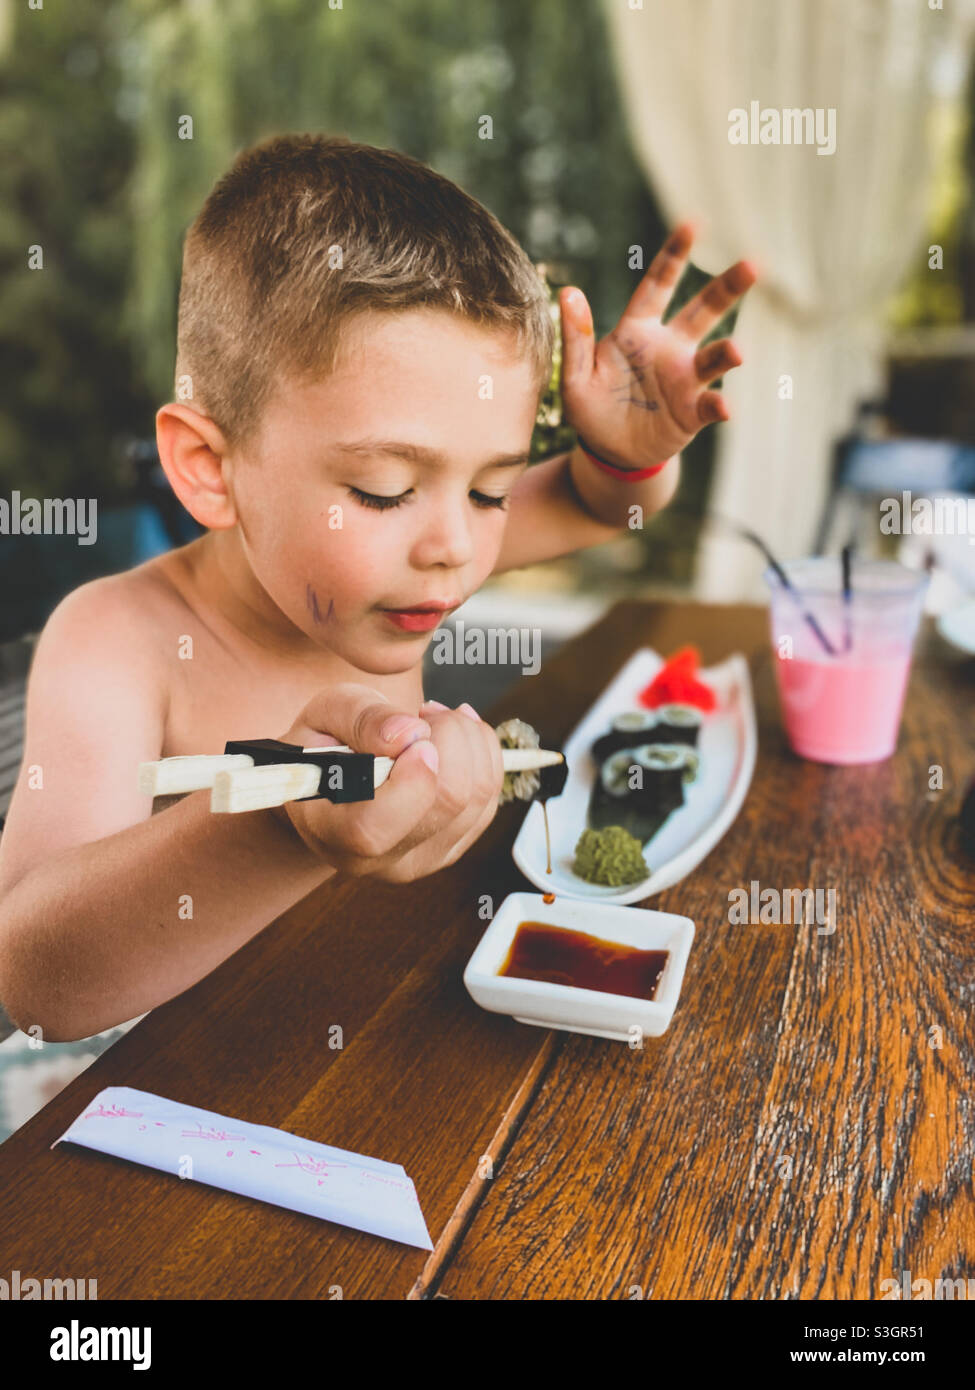 Five year old boy eating sushi and drinking a milkshake outside Stock Photo